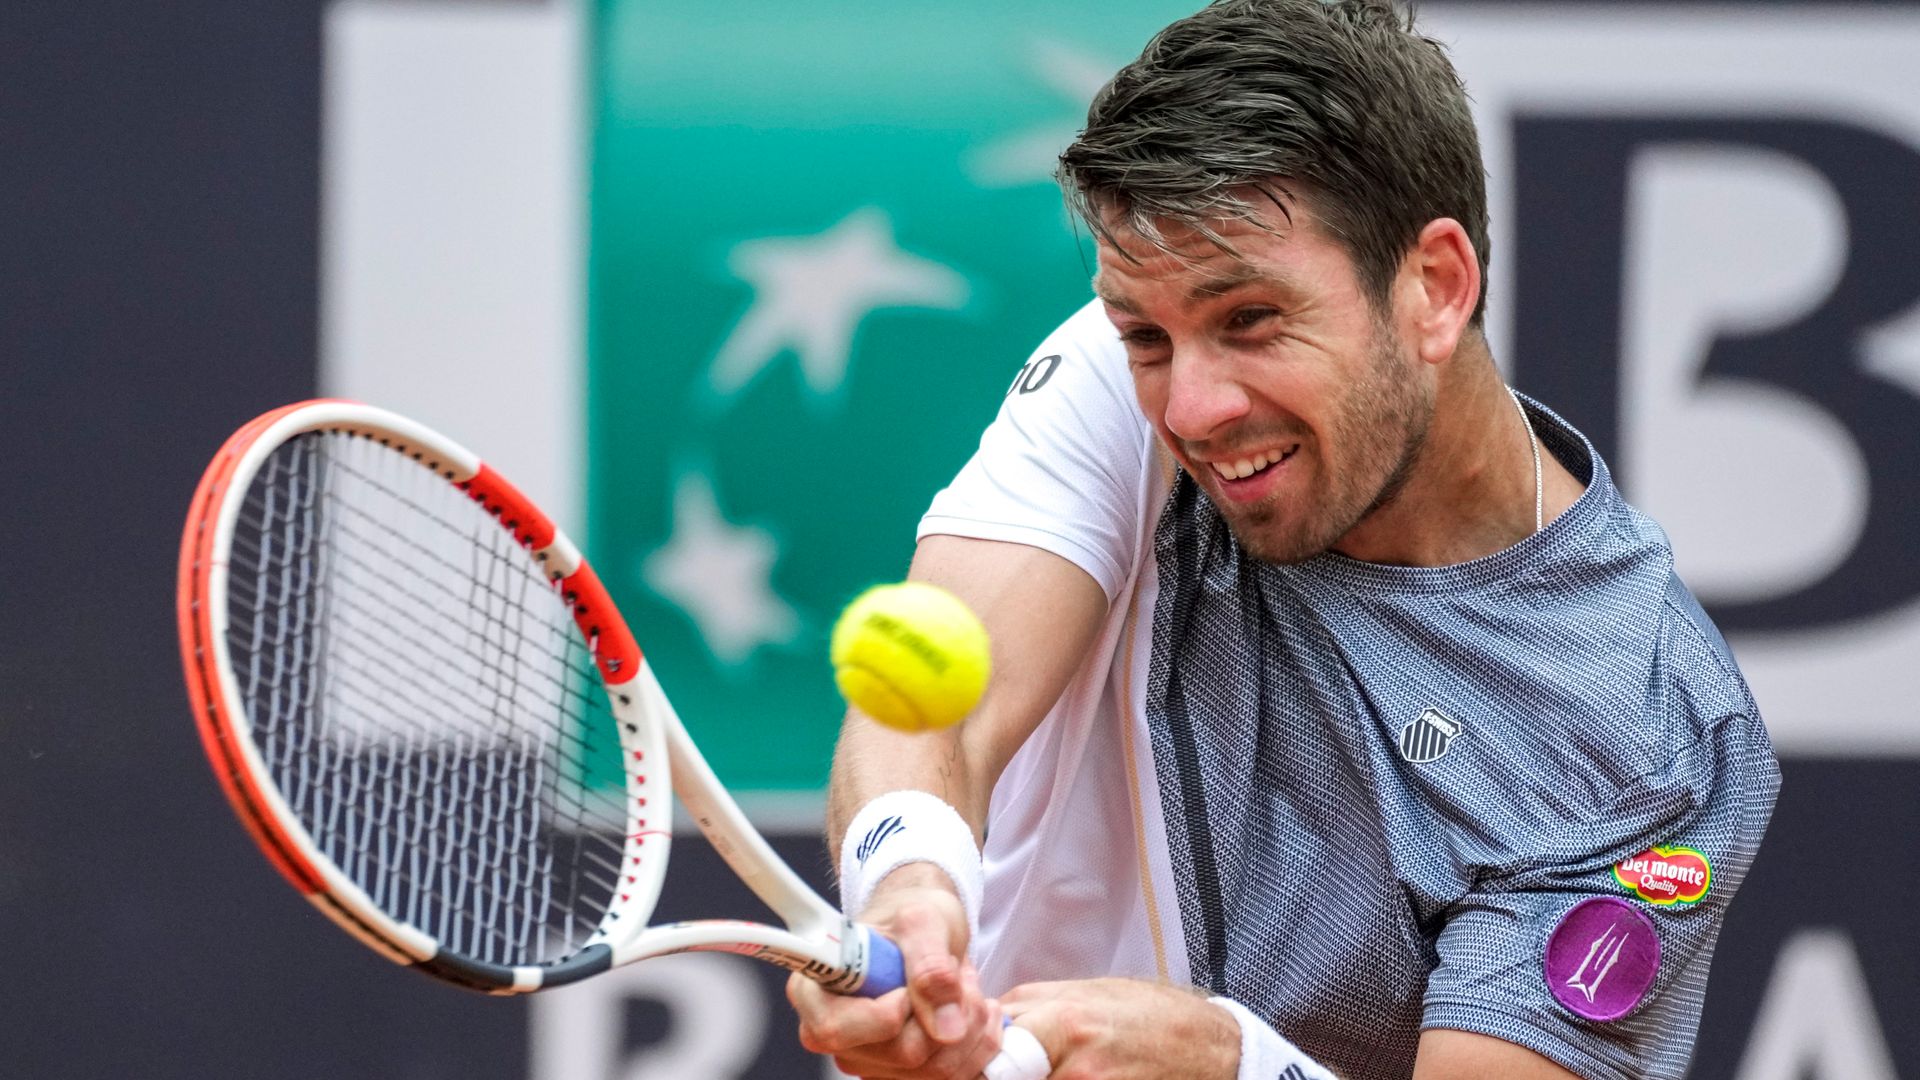 French Open LIVE! Norrie two sets up against Pouille; Alcaraz leads